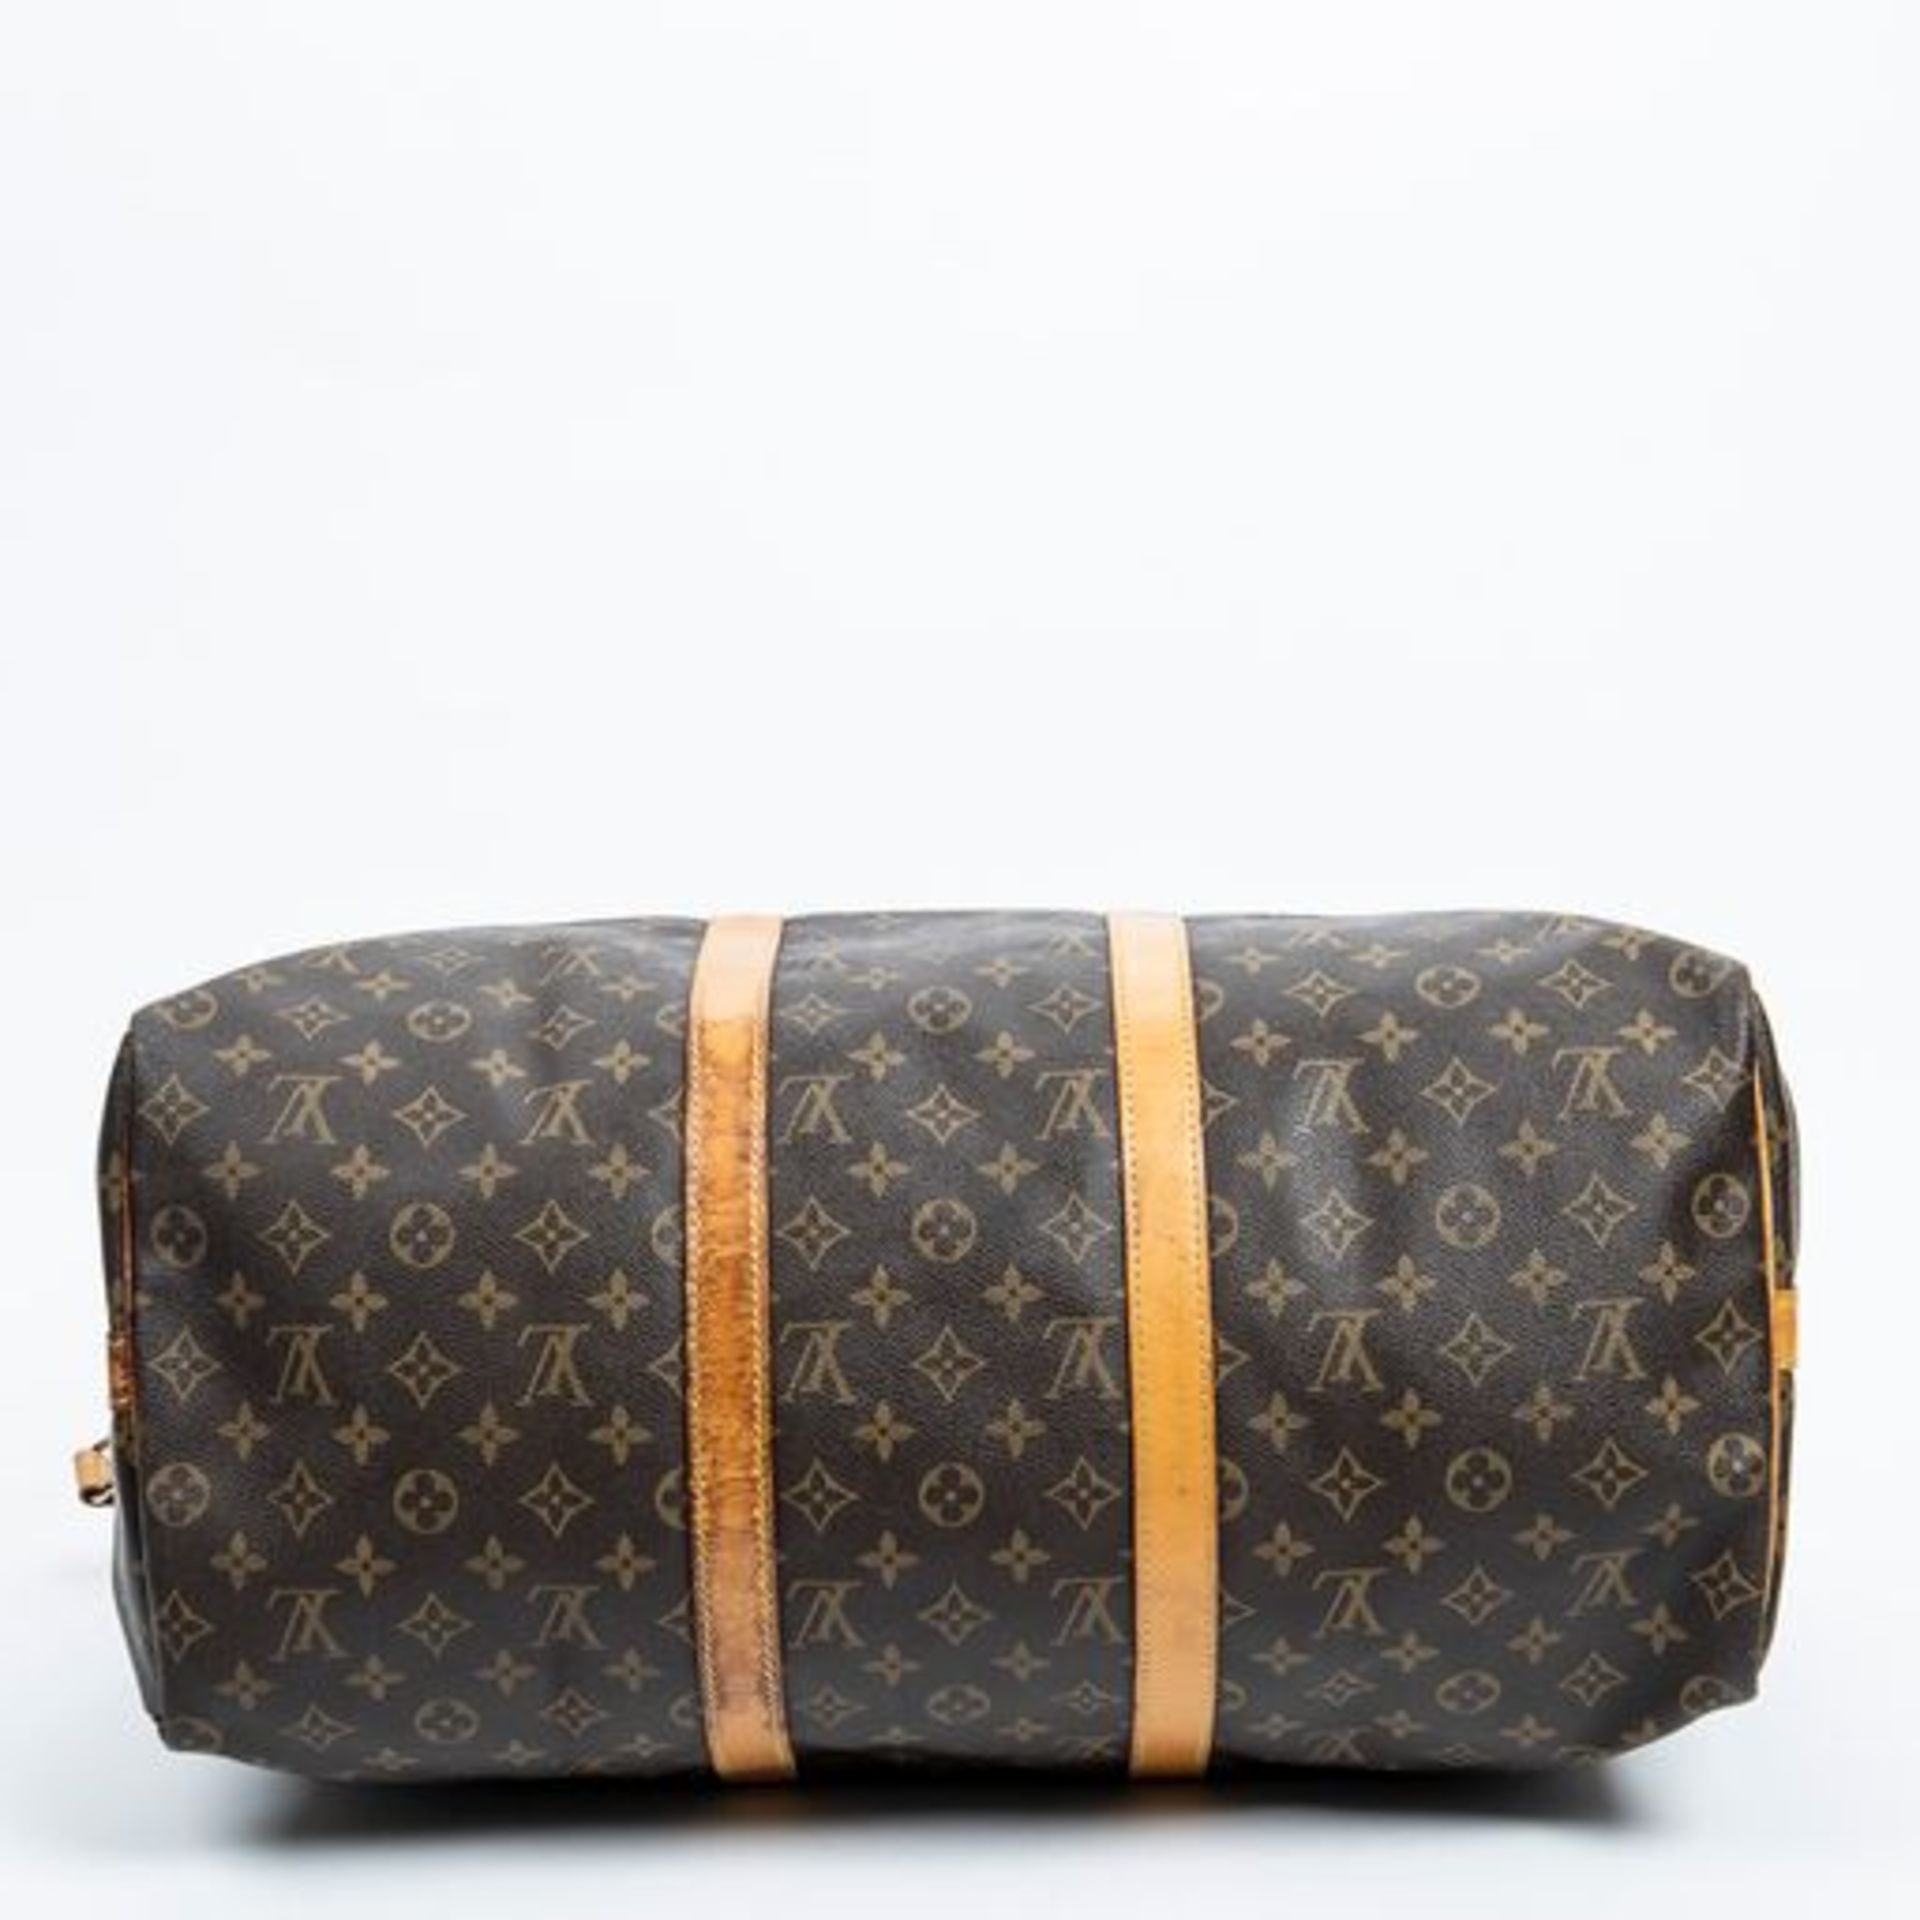 RRP £1340 Louis Vuitton Keepall Keepall Bandouliere Travel Bag Brown - AAS6233 - Grade AB - (Bags - Image 4 of 5